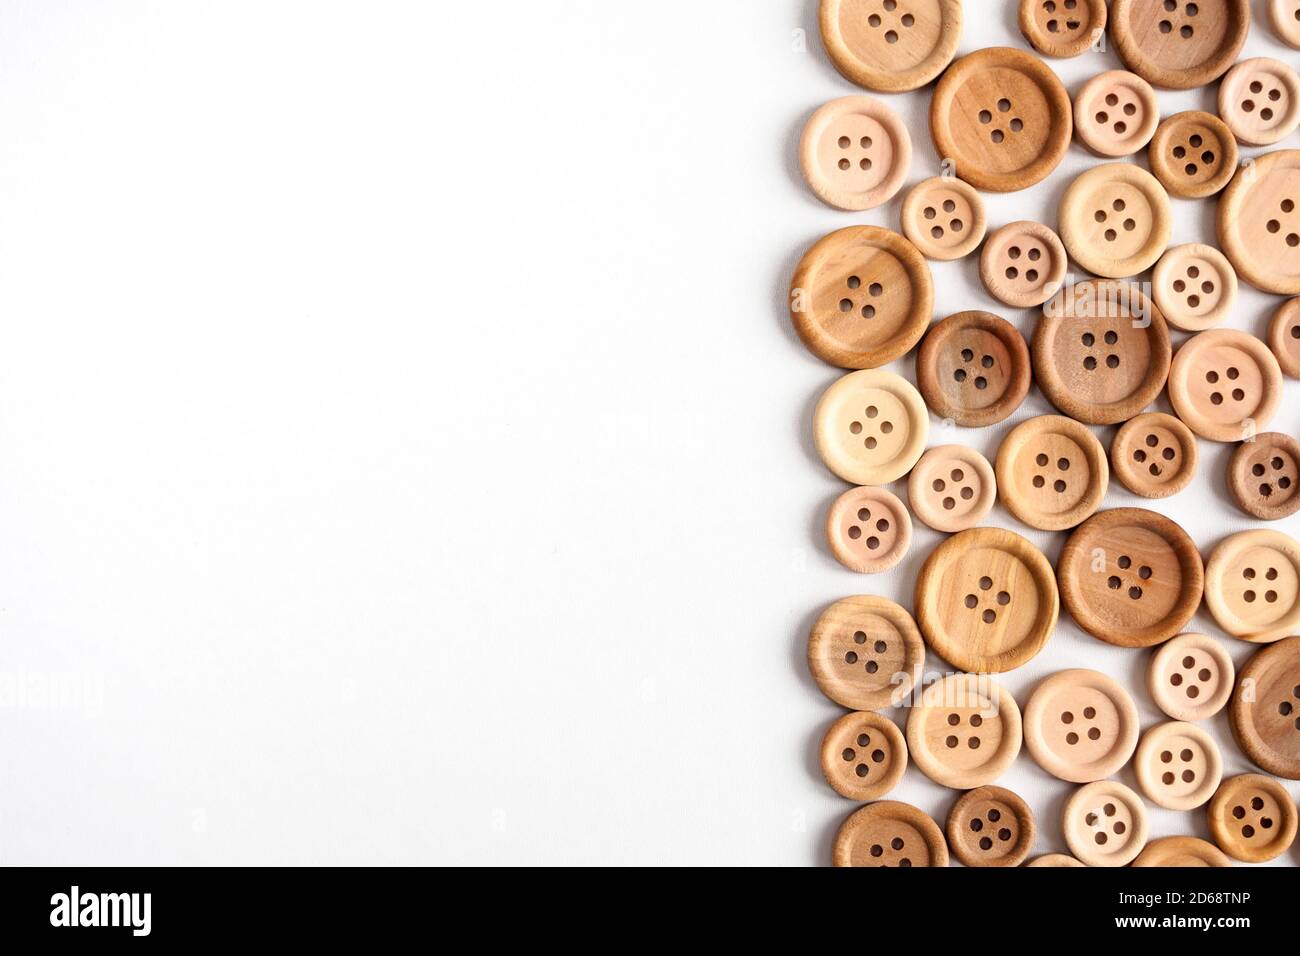 various wooden beige buttons on a white background, top view flat lay Stock Photo